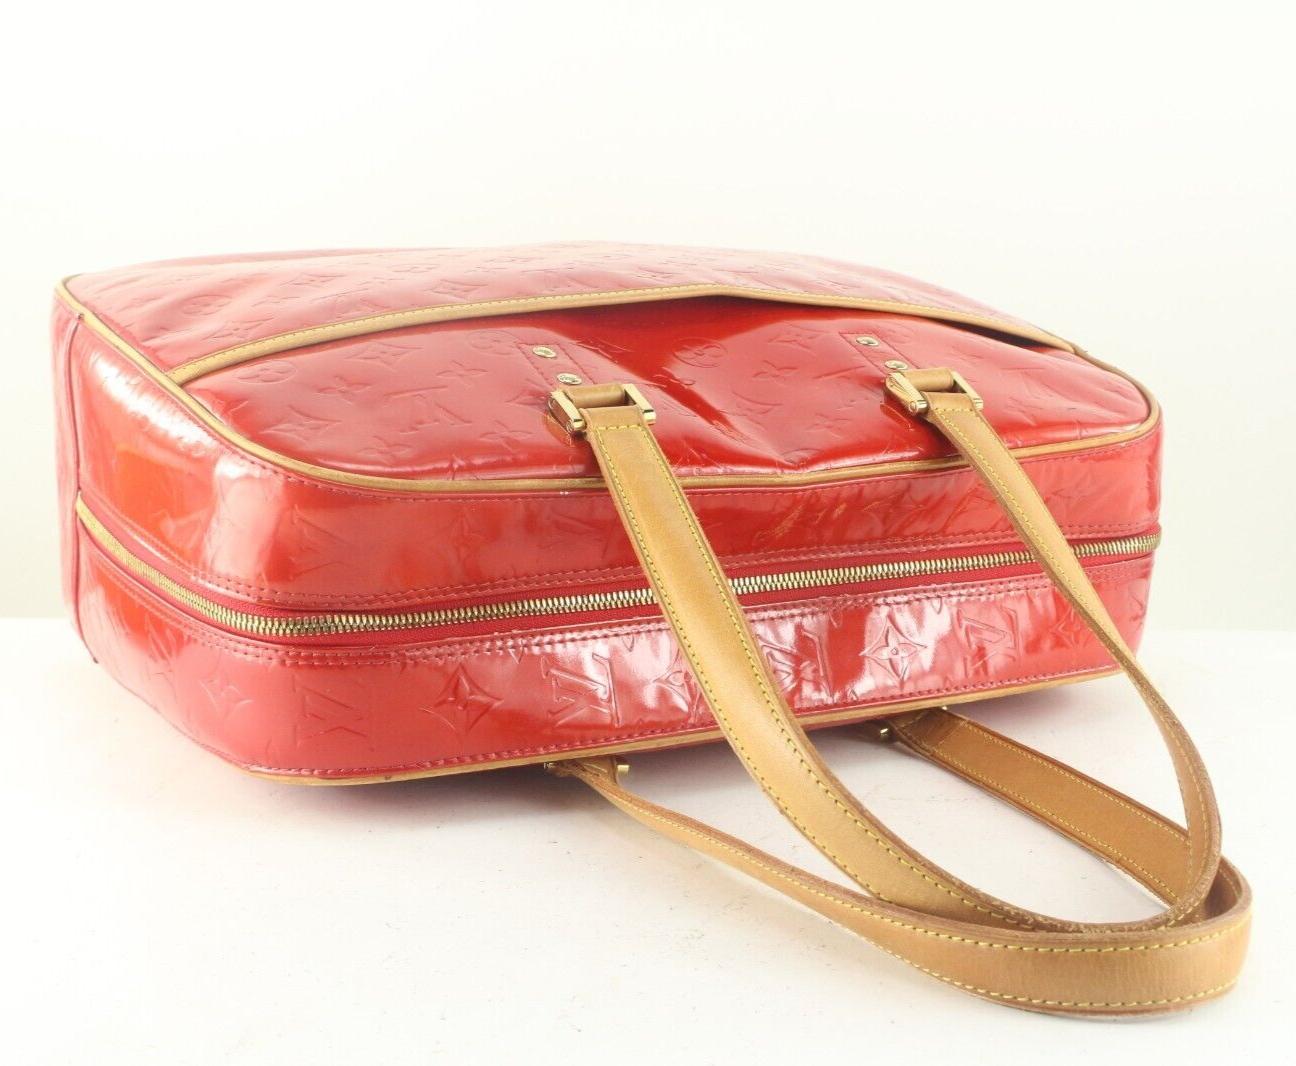 Louis Vuitton Red Monogram Vernis Sutton Travel Shoulder bag 3LVS921K In Good Condition For Sale In Dix hills, NY